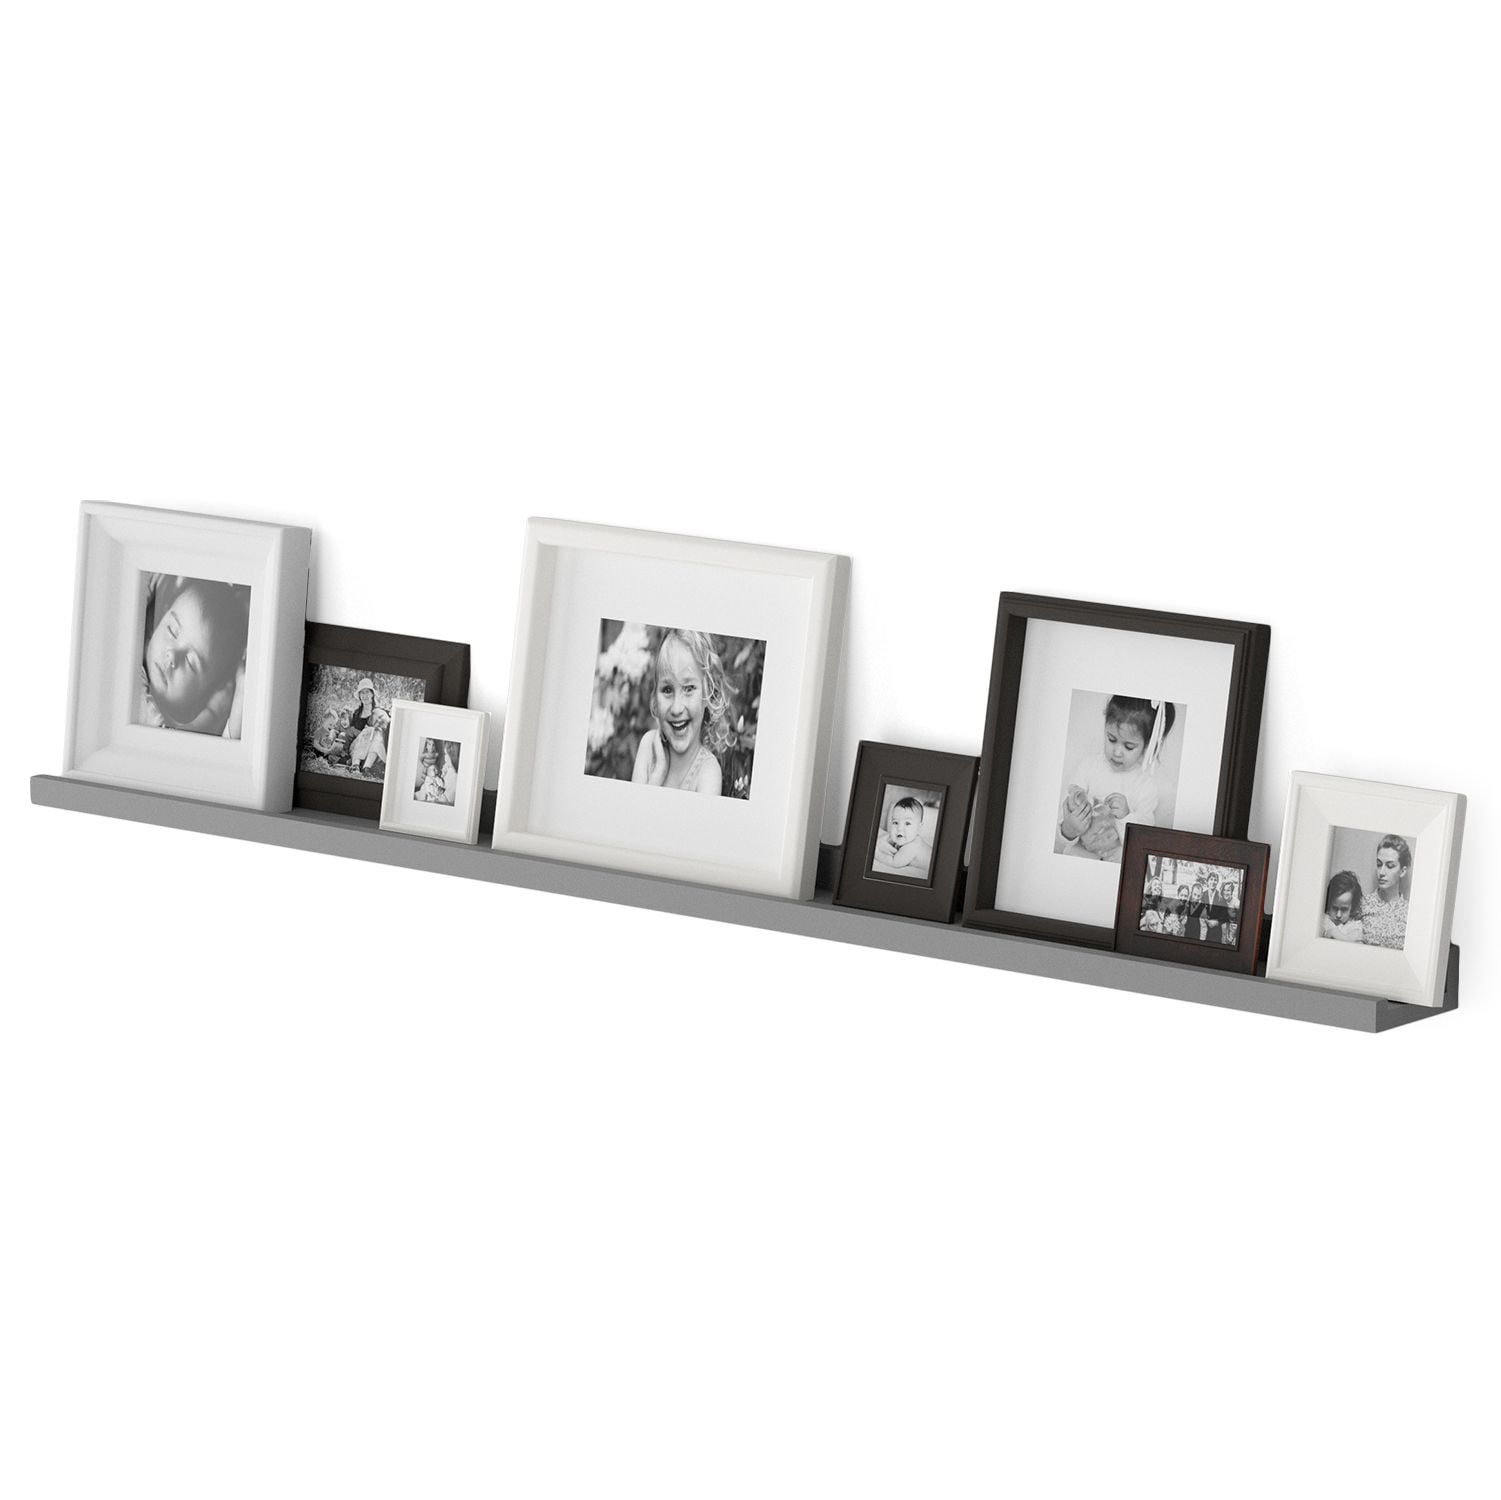 46" Floating White Wall Shelf Picture Display Ledge Wall Mount Shelves Storage 